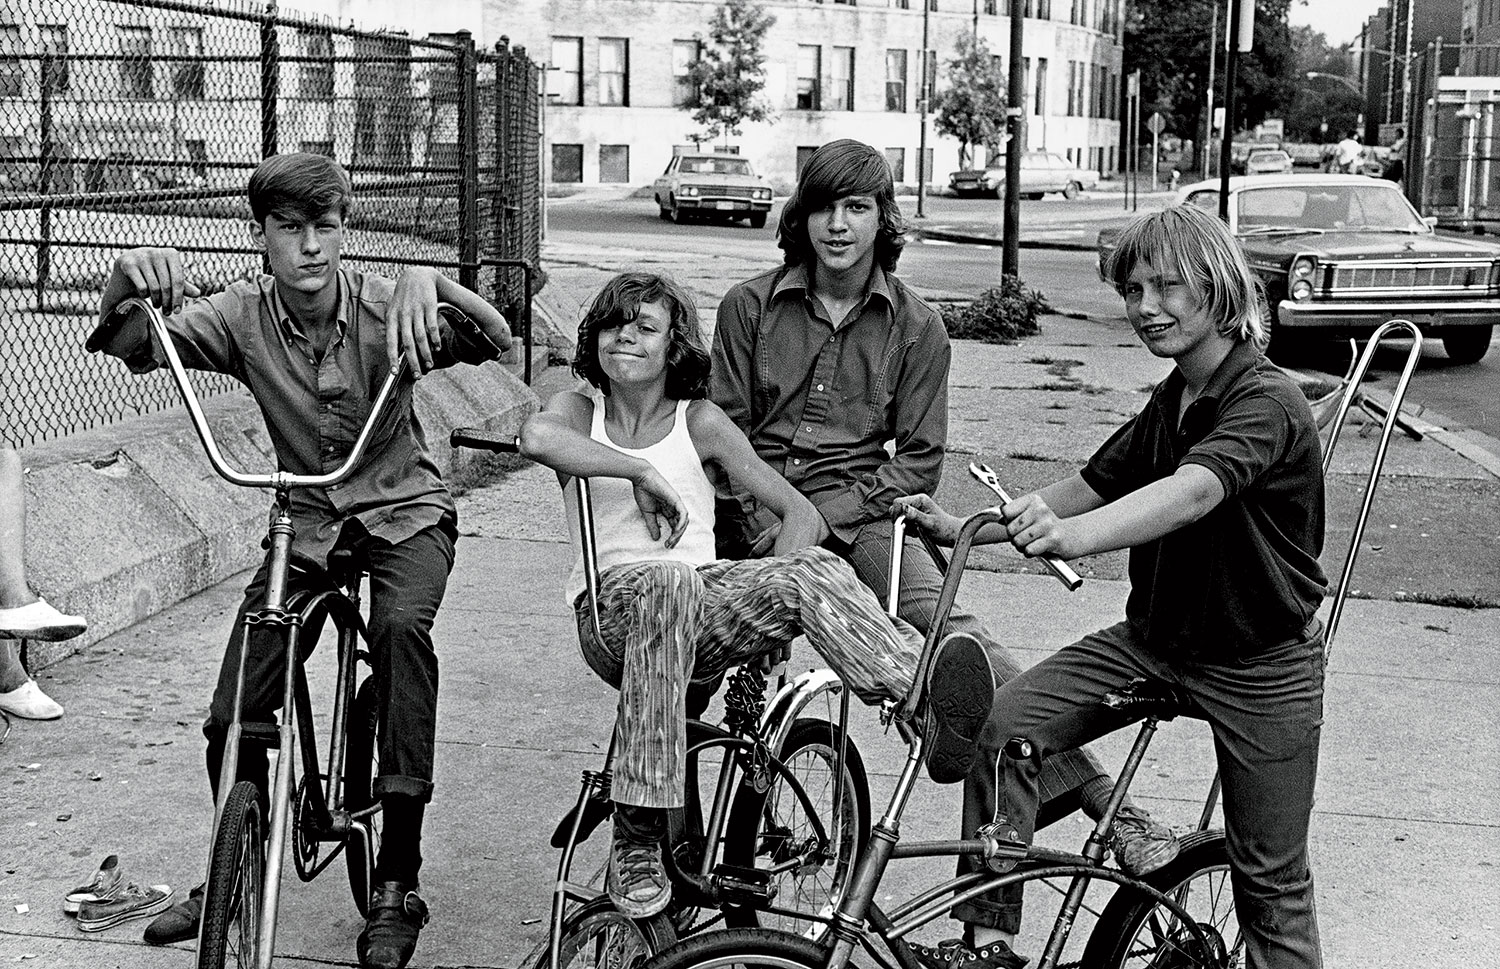 A 1971 photo of a group of kids on bikes in Uptown.